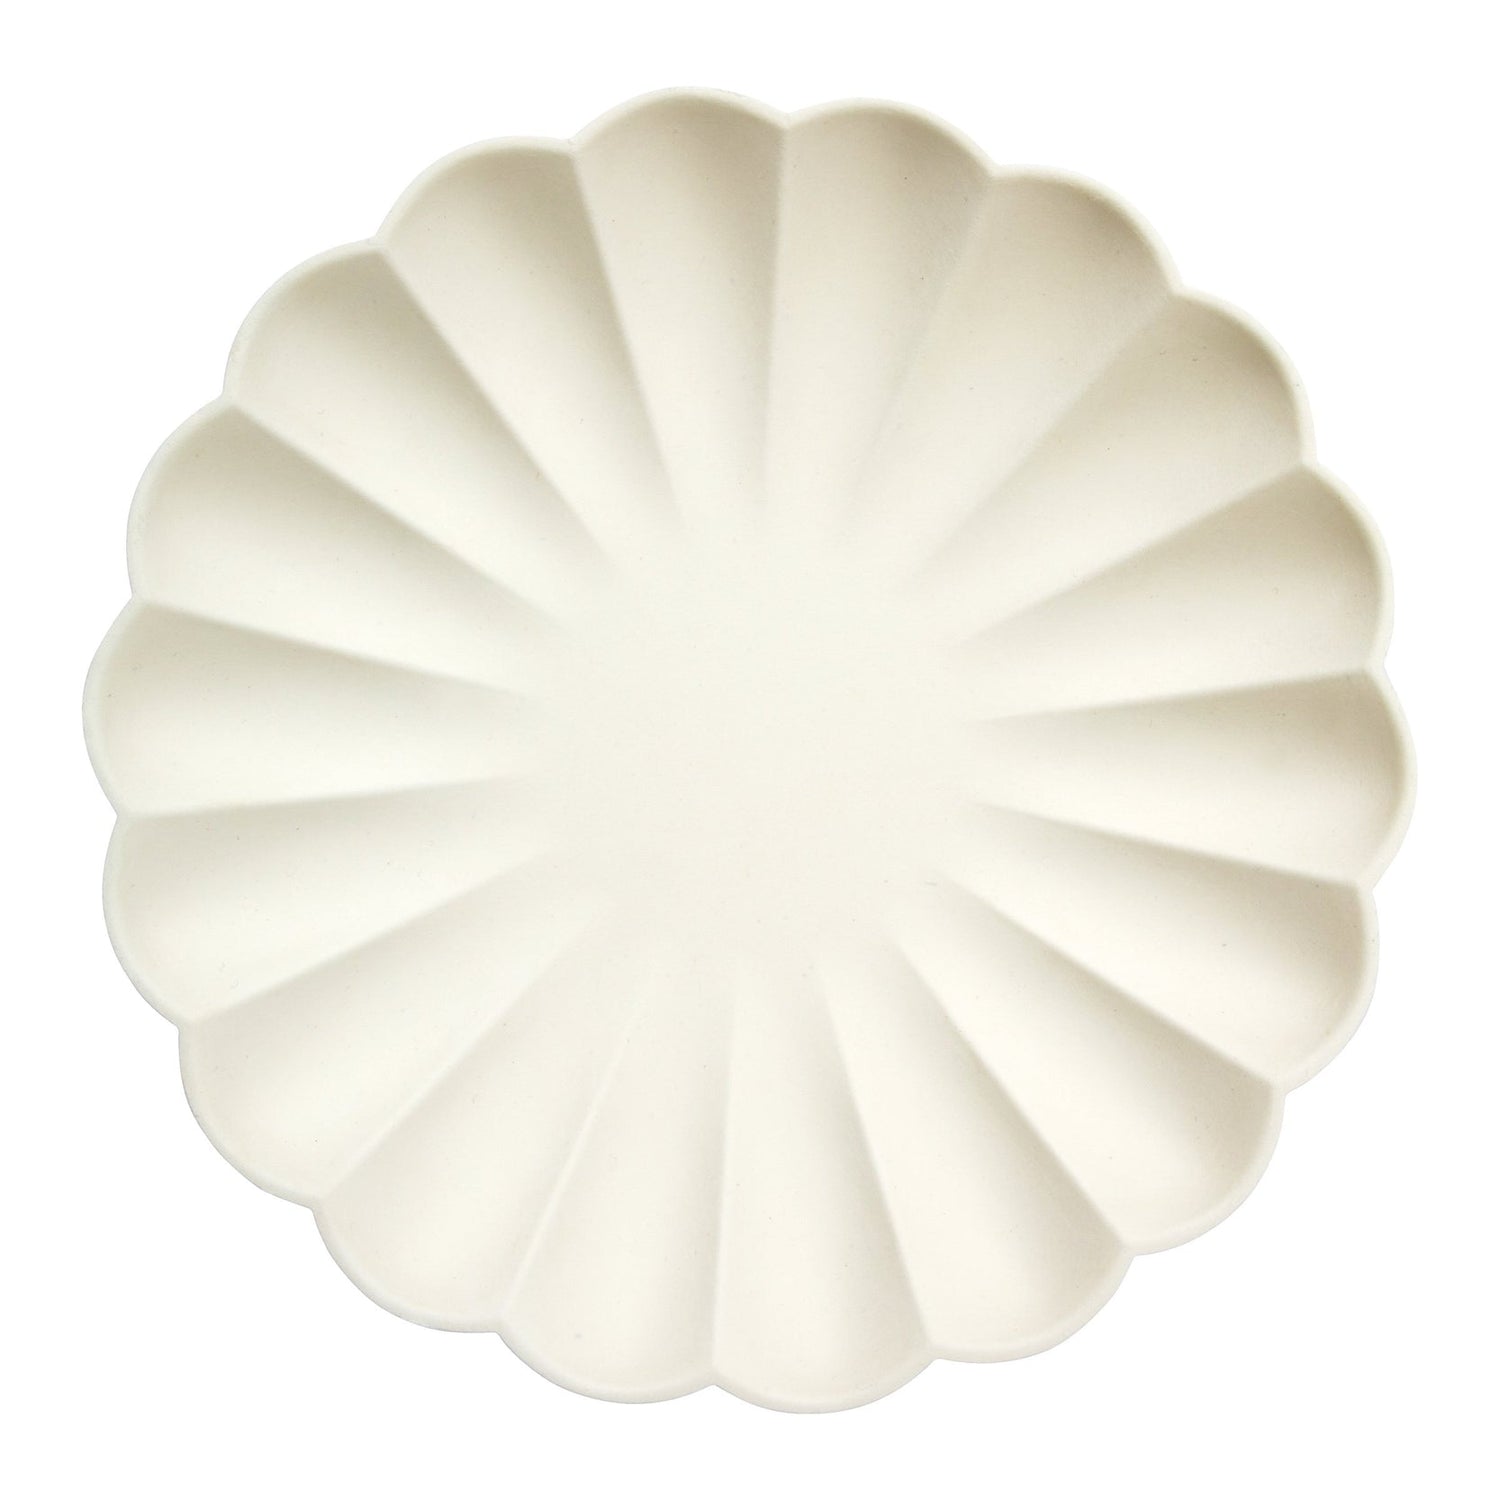 A Meri Meri cream eco plate with a flower pattern on it made from natural materials.